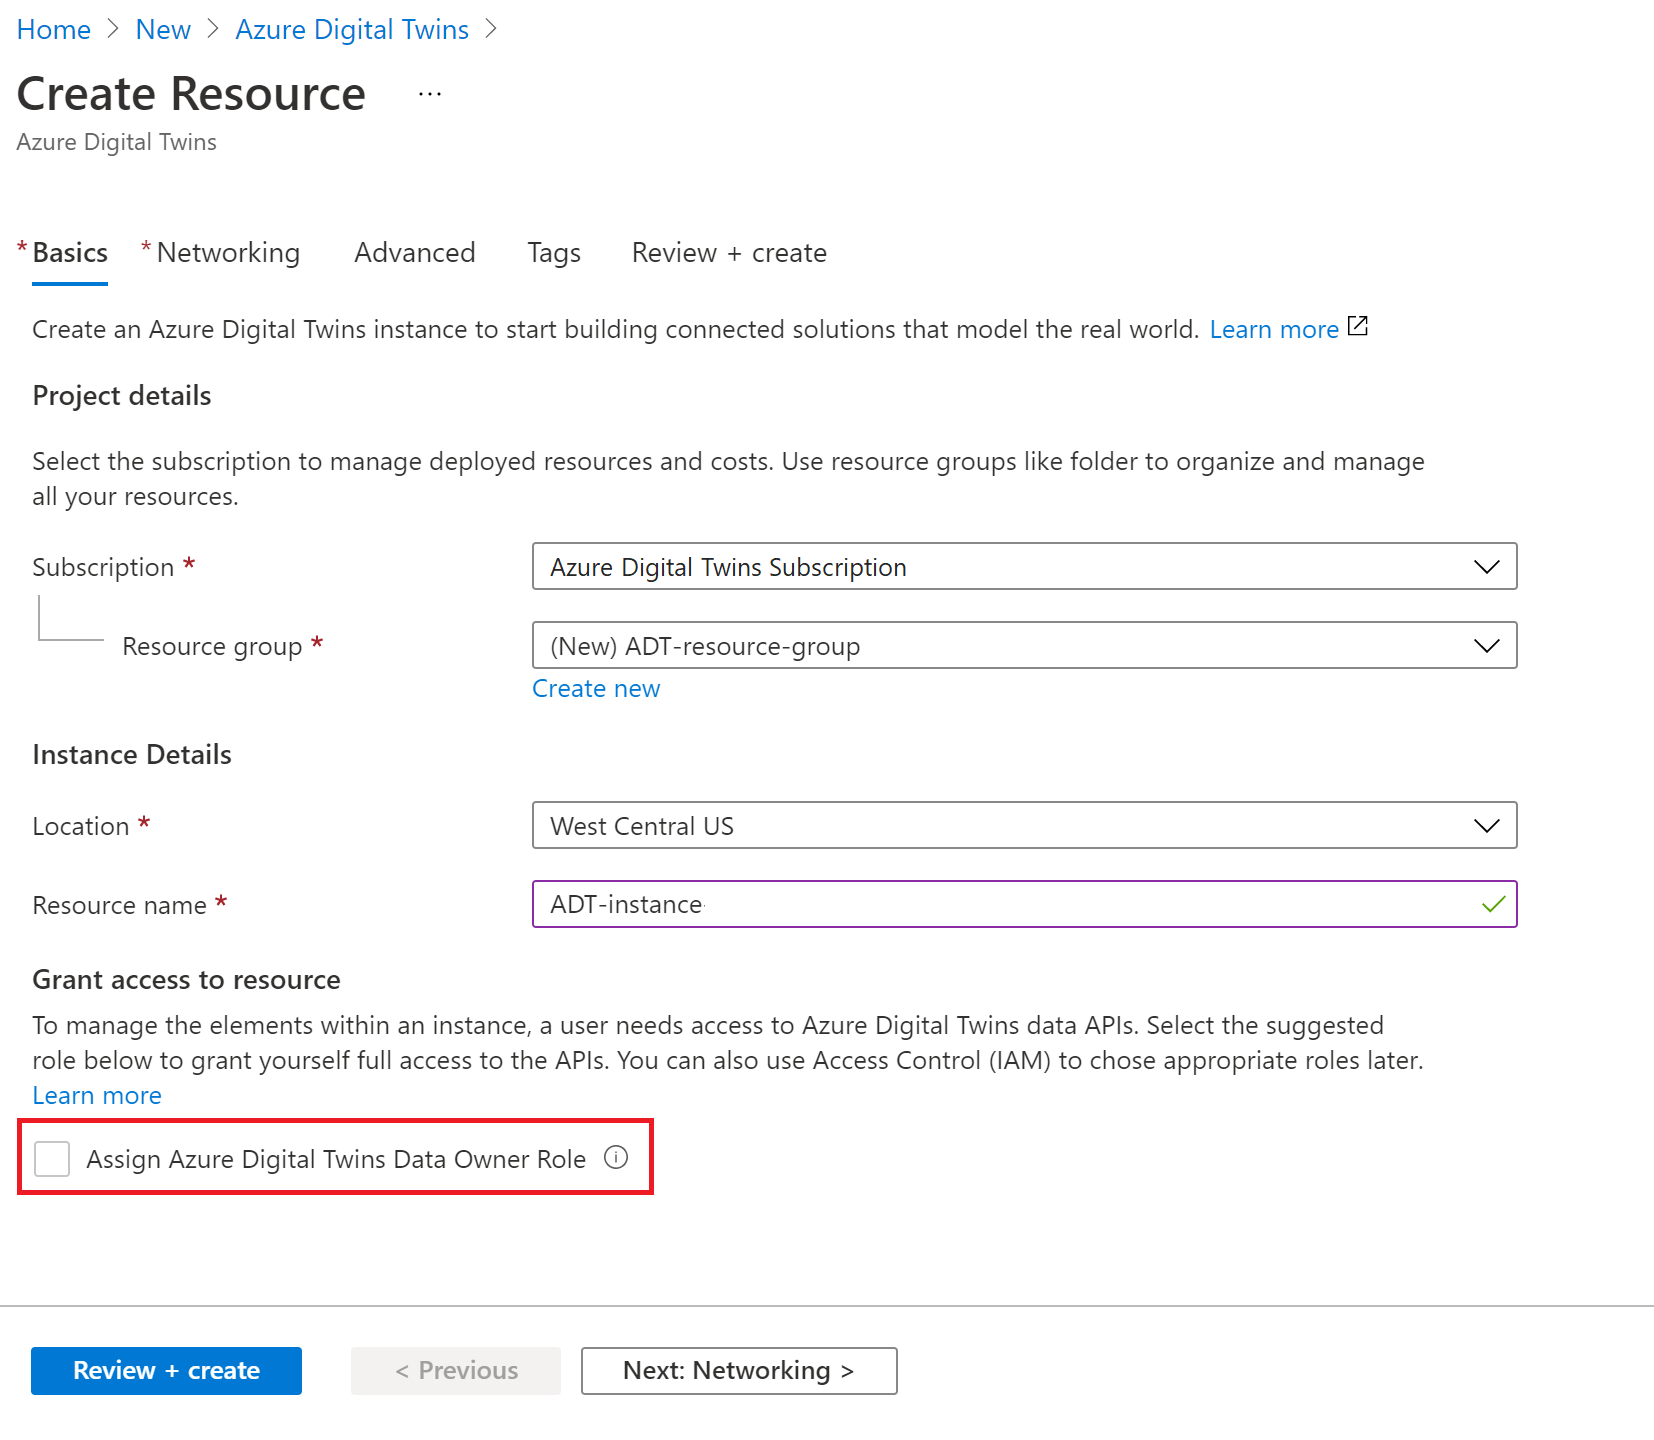 Screenshot of the Create Resource process for Azure Digital Twins in the Azure portal. The checkbox under Grant access to resource is disabled.